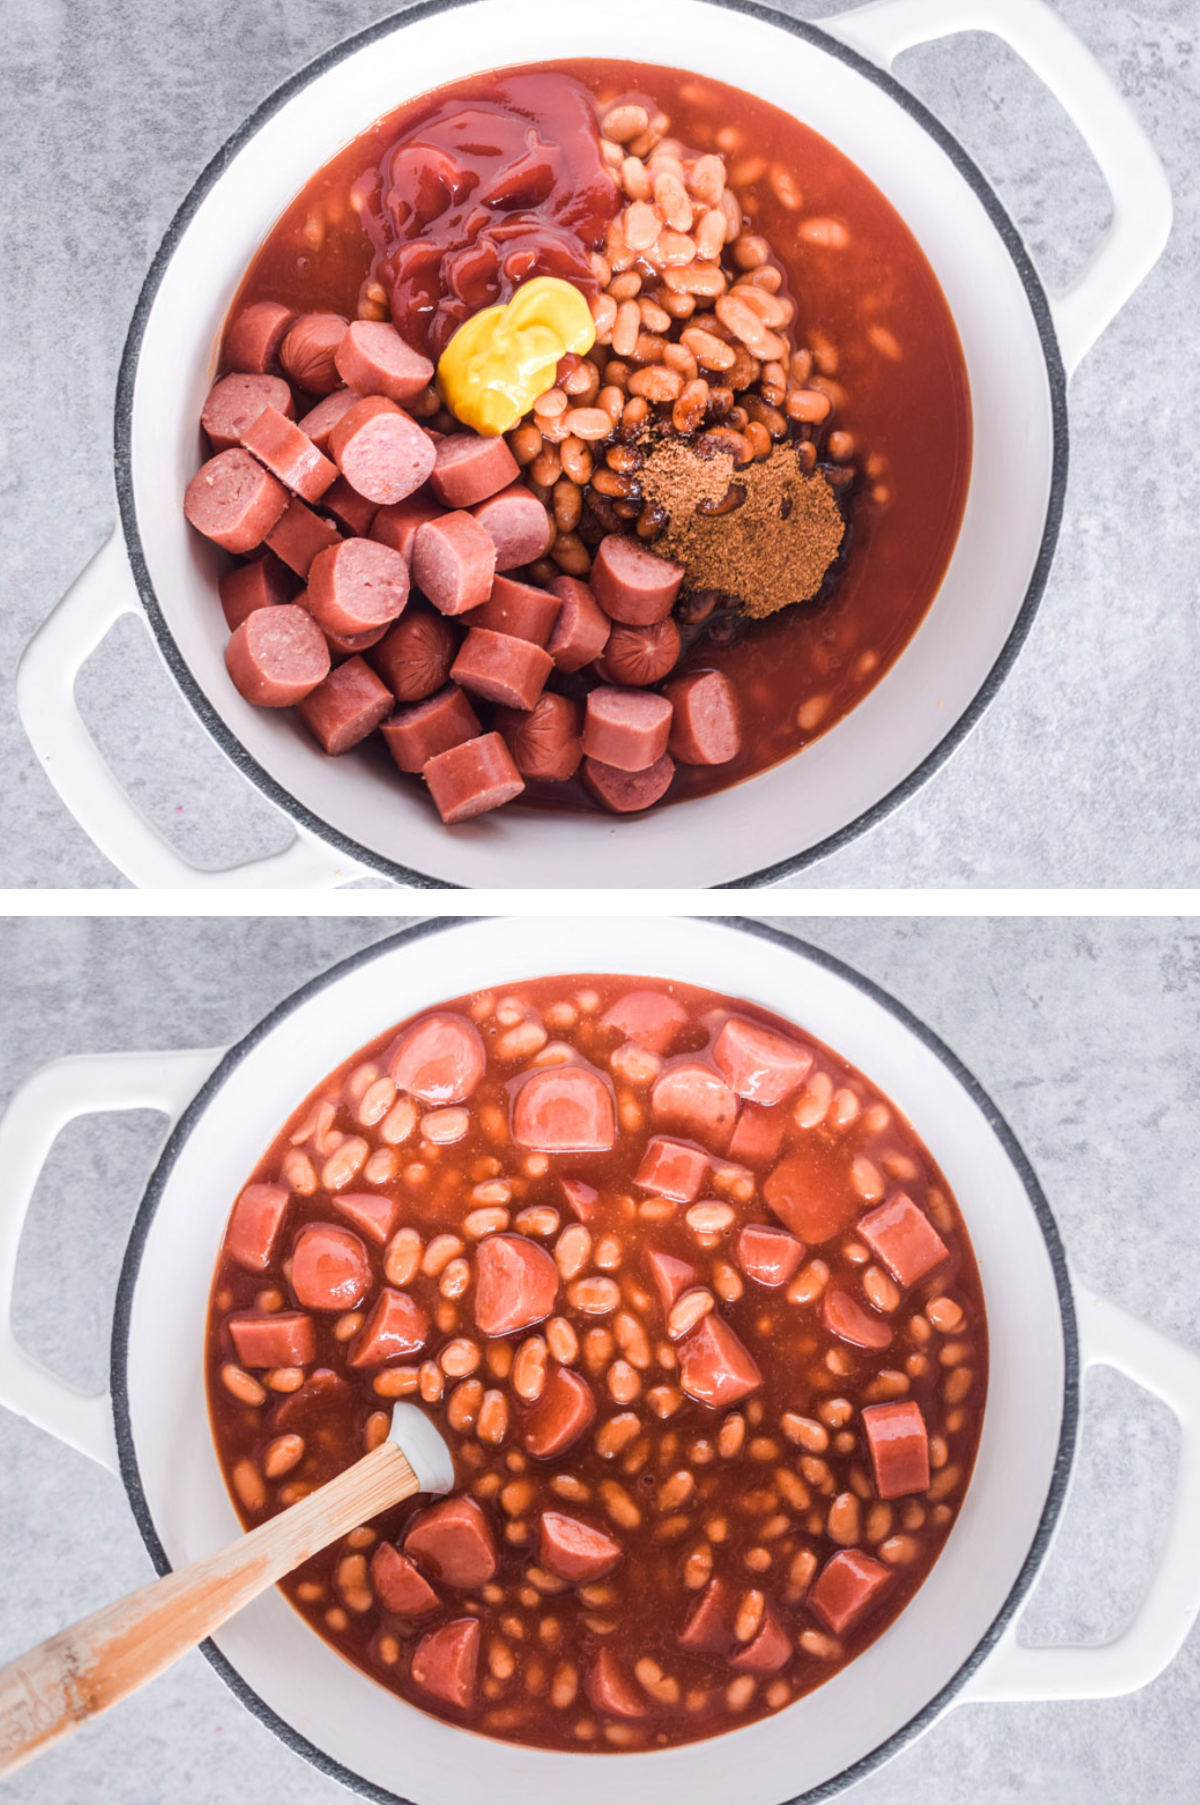 Two overhead images in one: 1. All ingredients added to a pot. 2. All ingredients mixed in a pot. 